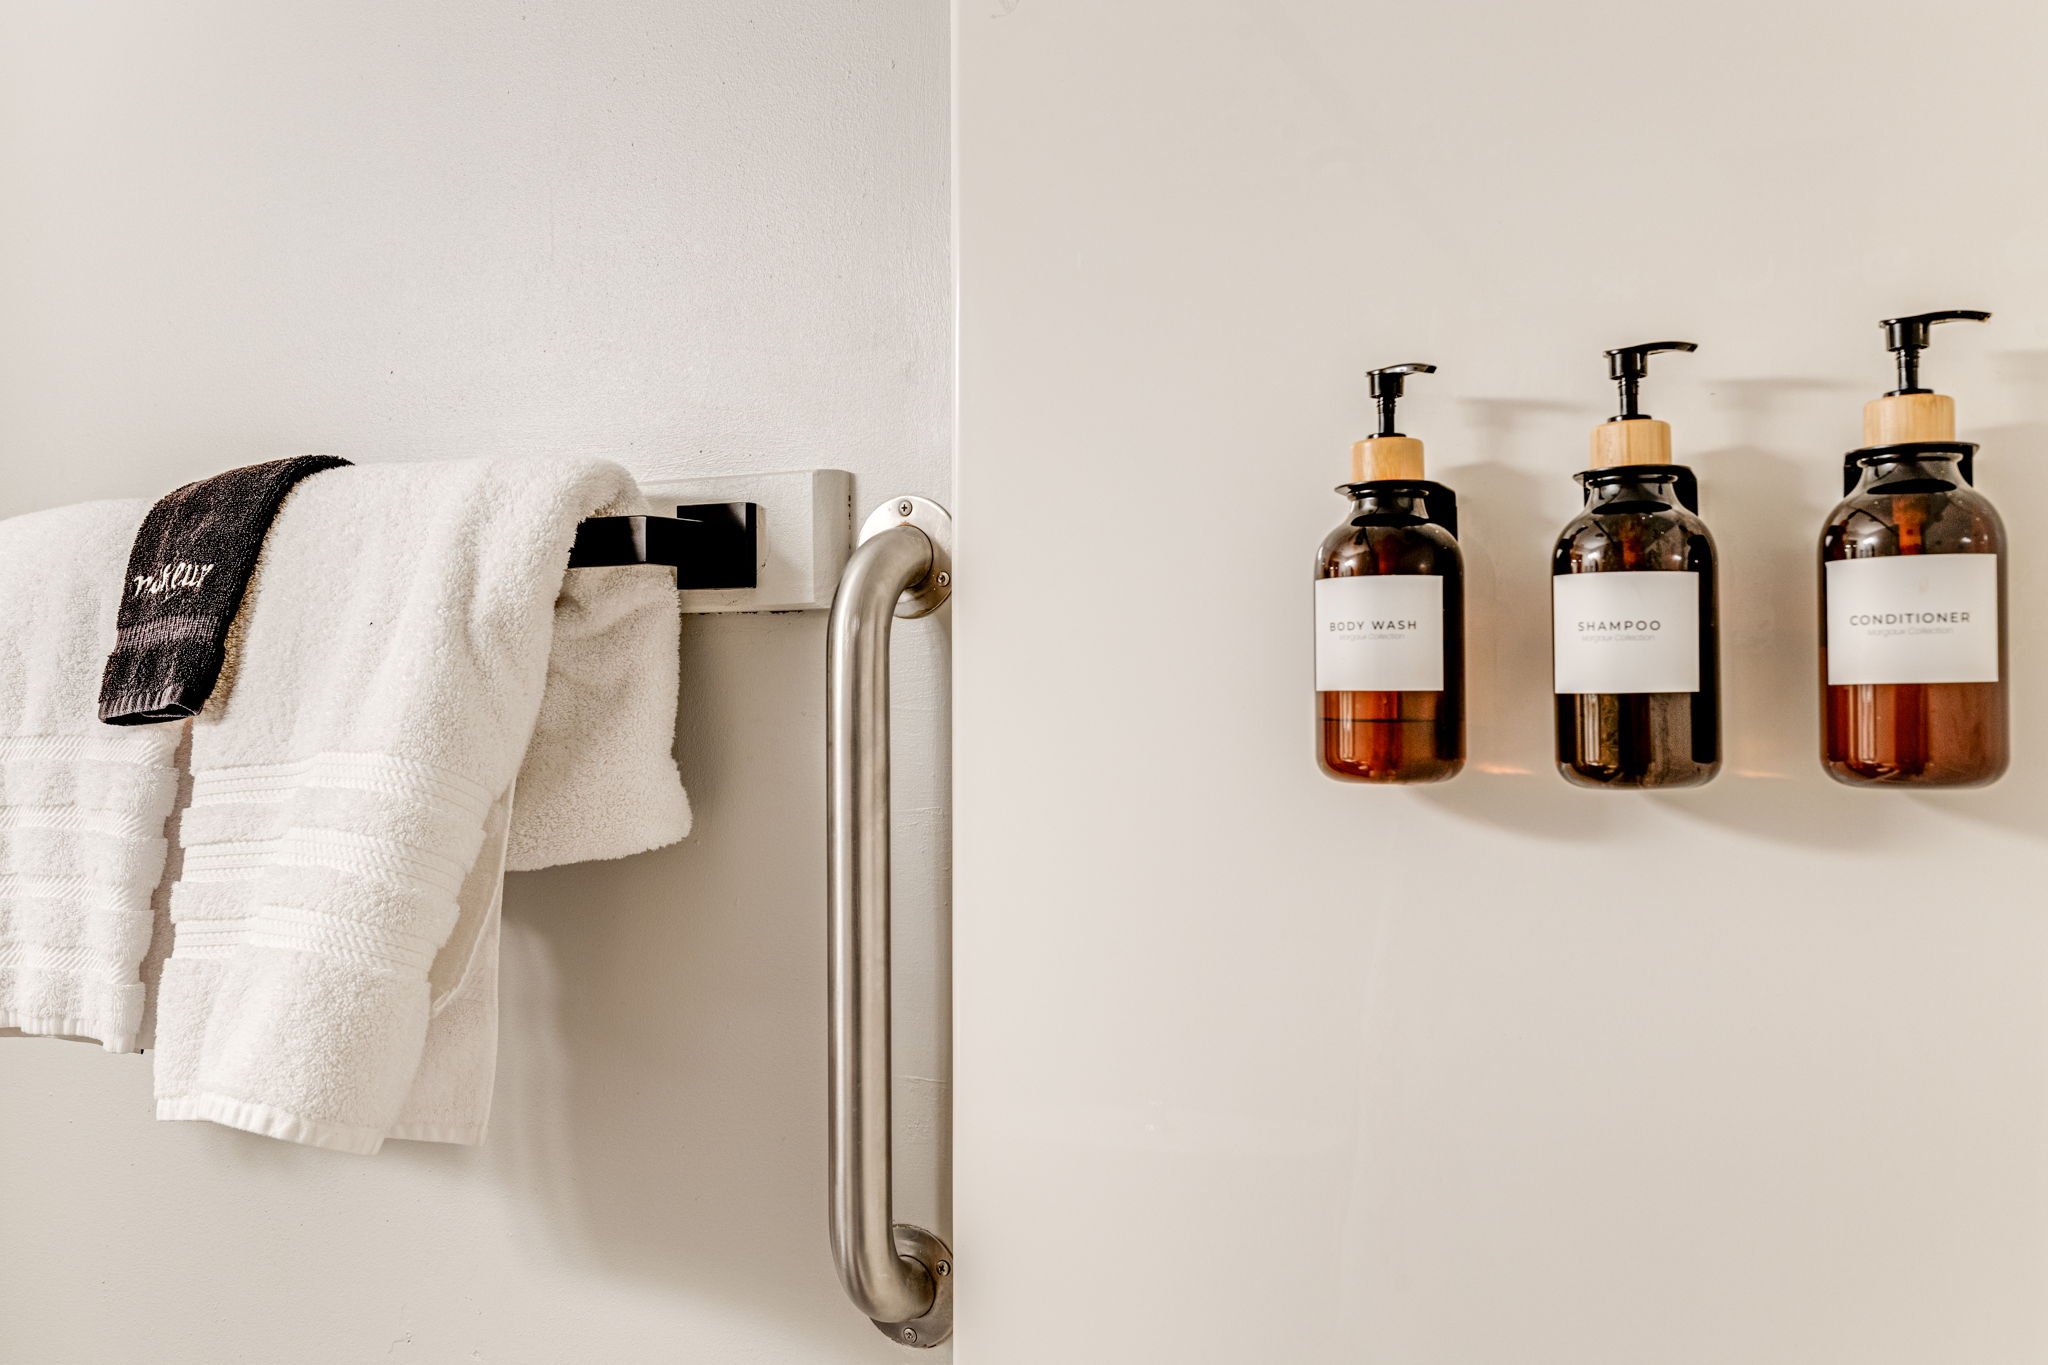 Bath towels and amenities